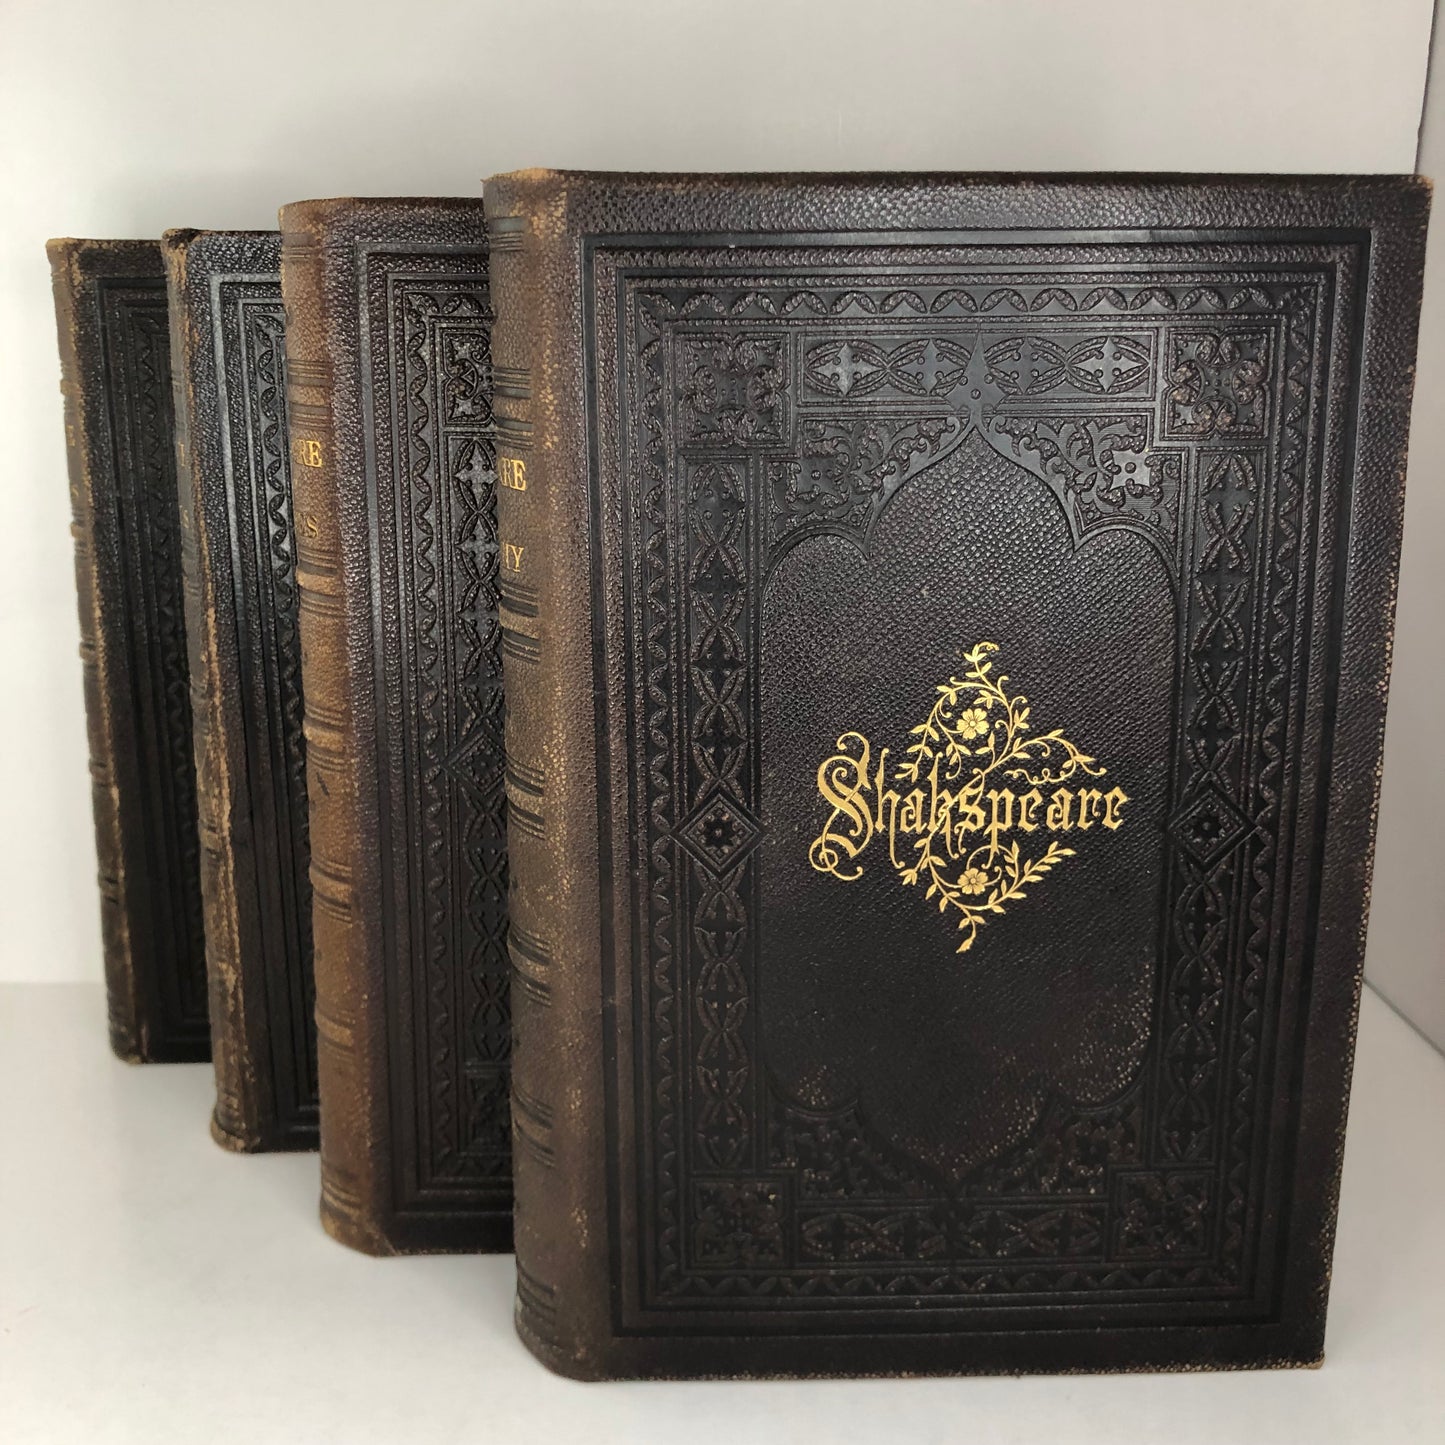 The Works of William Shakespeare Knight's Pictorial Edition (Set of 4)